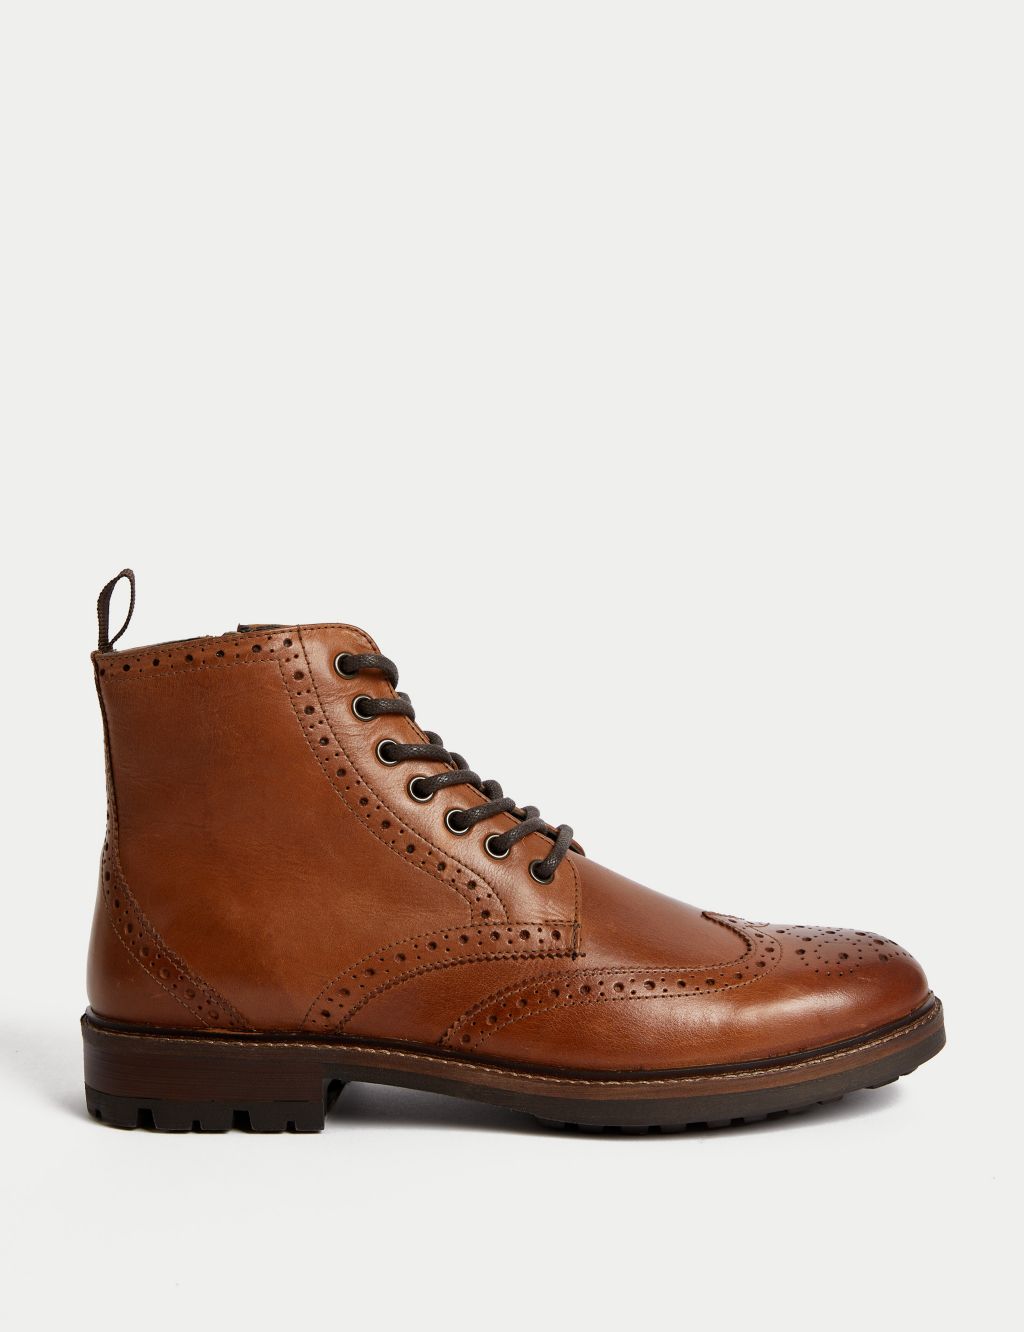 Leather Side Zip Brogue Casual Boots image 1